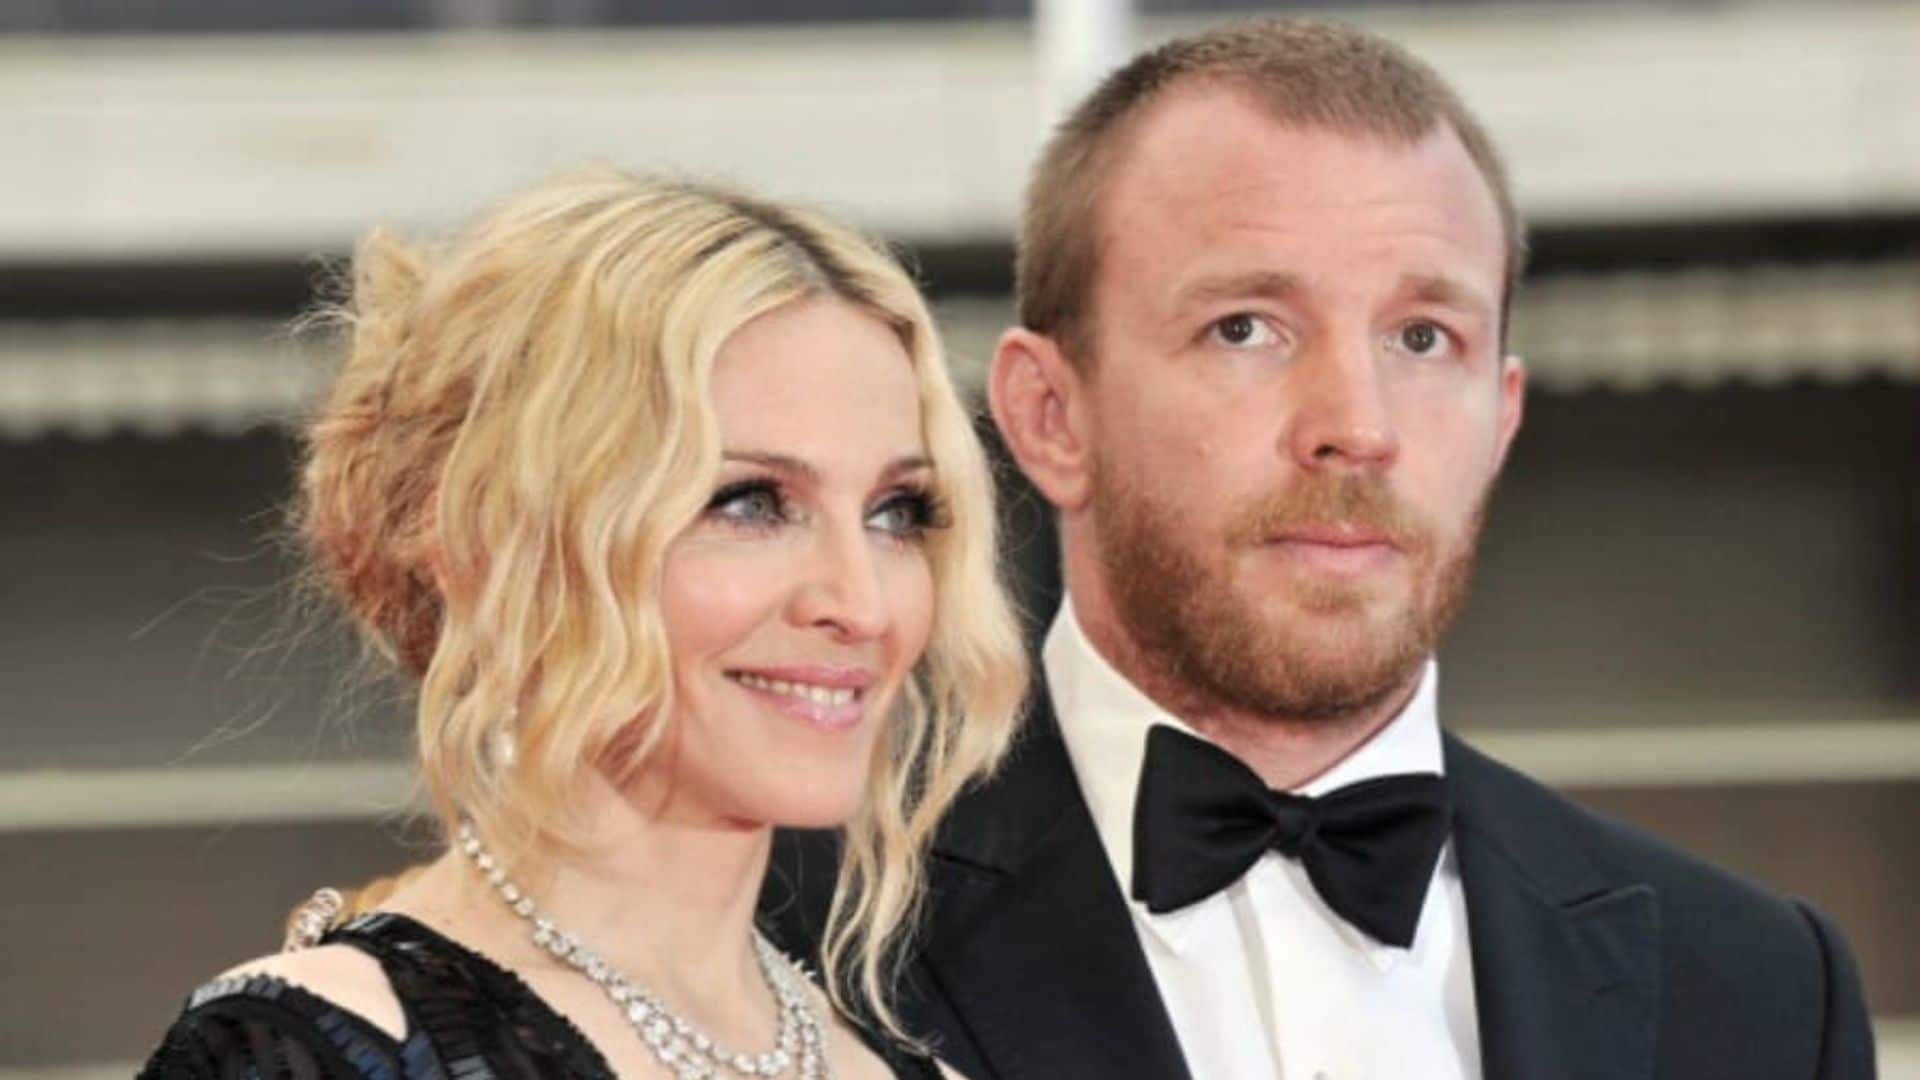 Madonna and Guy were married for eight years.
<br>
Photo: Getty Images